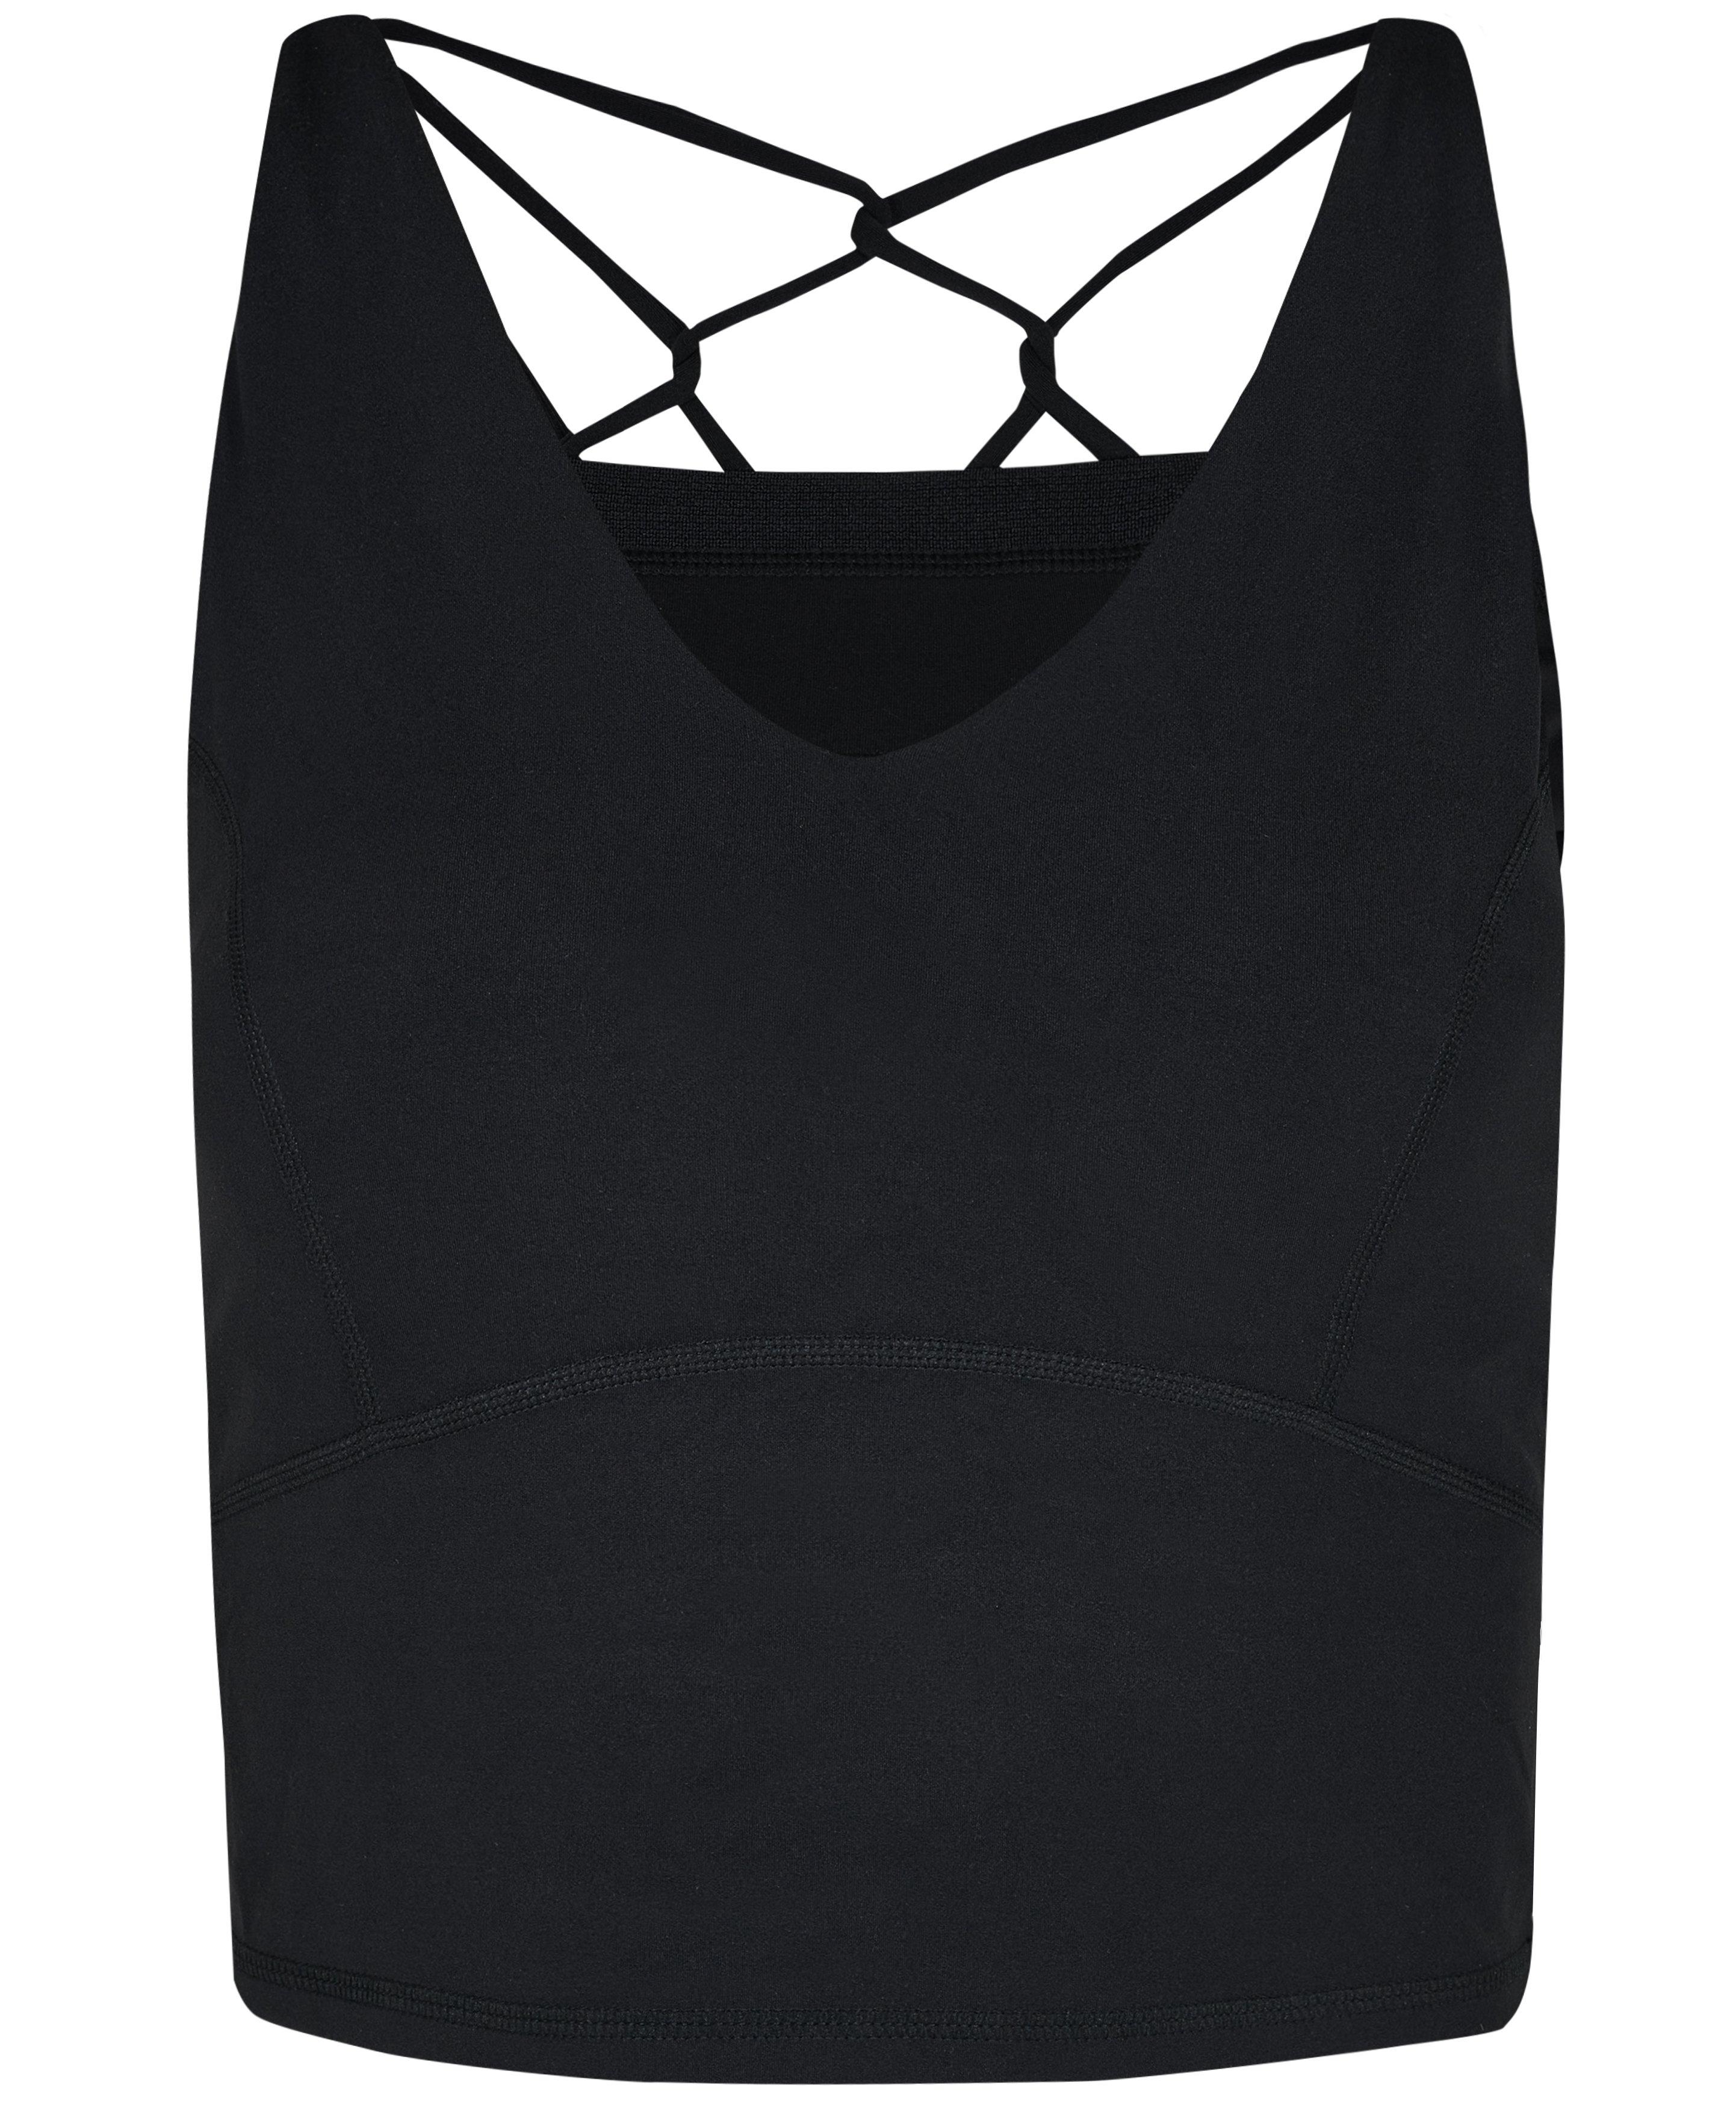 MIJIE Women's Turtleneck Sports Bra, Strappy Back Crop Top with Removable  Chest Pad, Bras Wirefree Cropped Tank (Black Small)